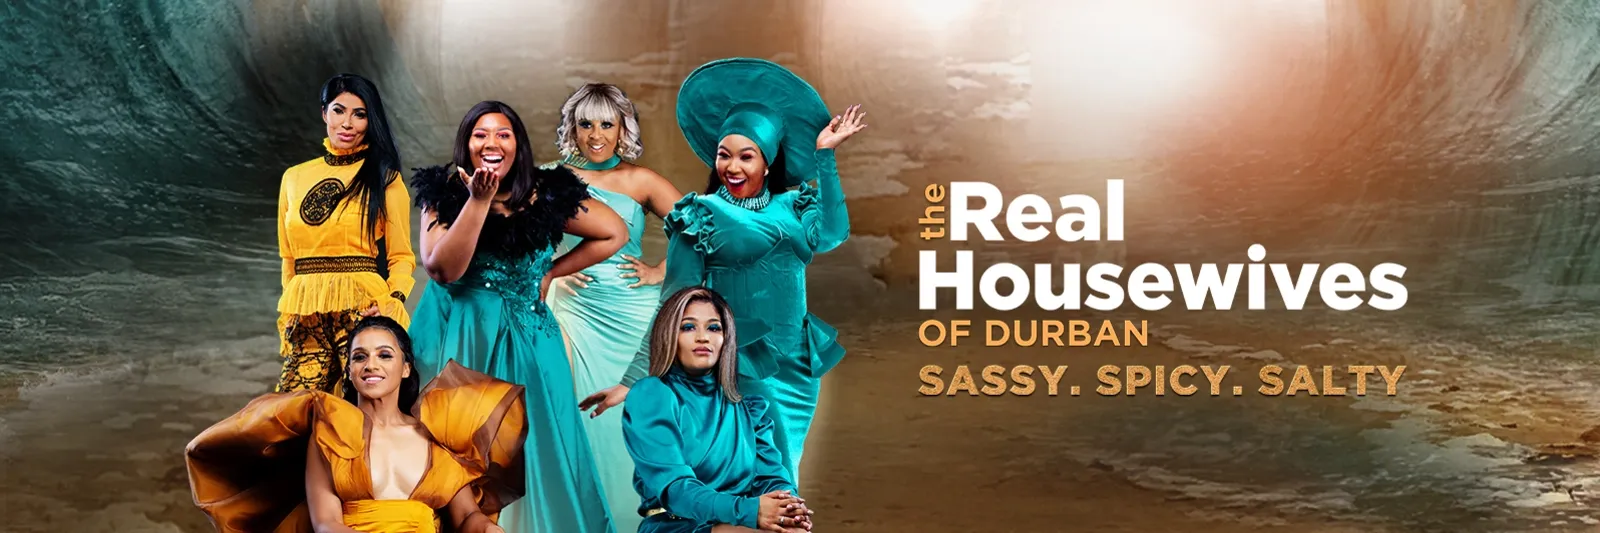 The Real Housewives Of Durban S04 (Episode 10 - 12 Added) 3